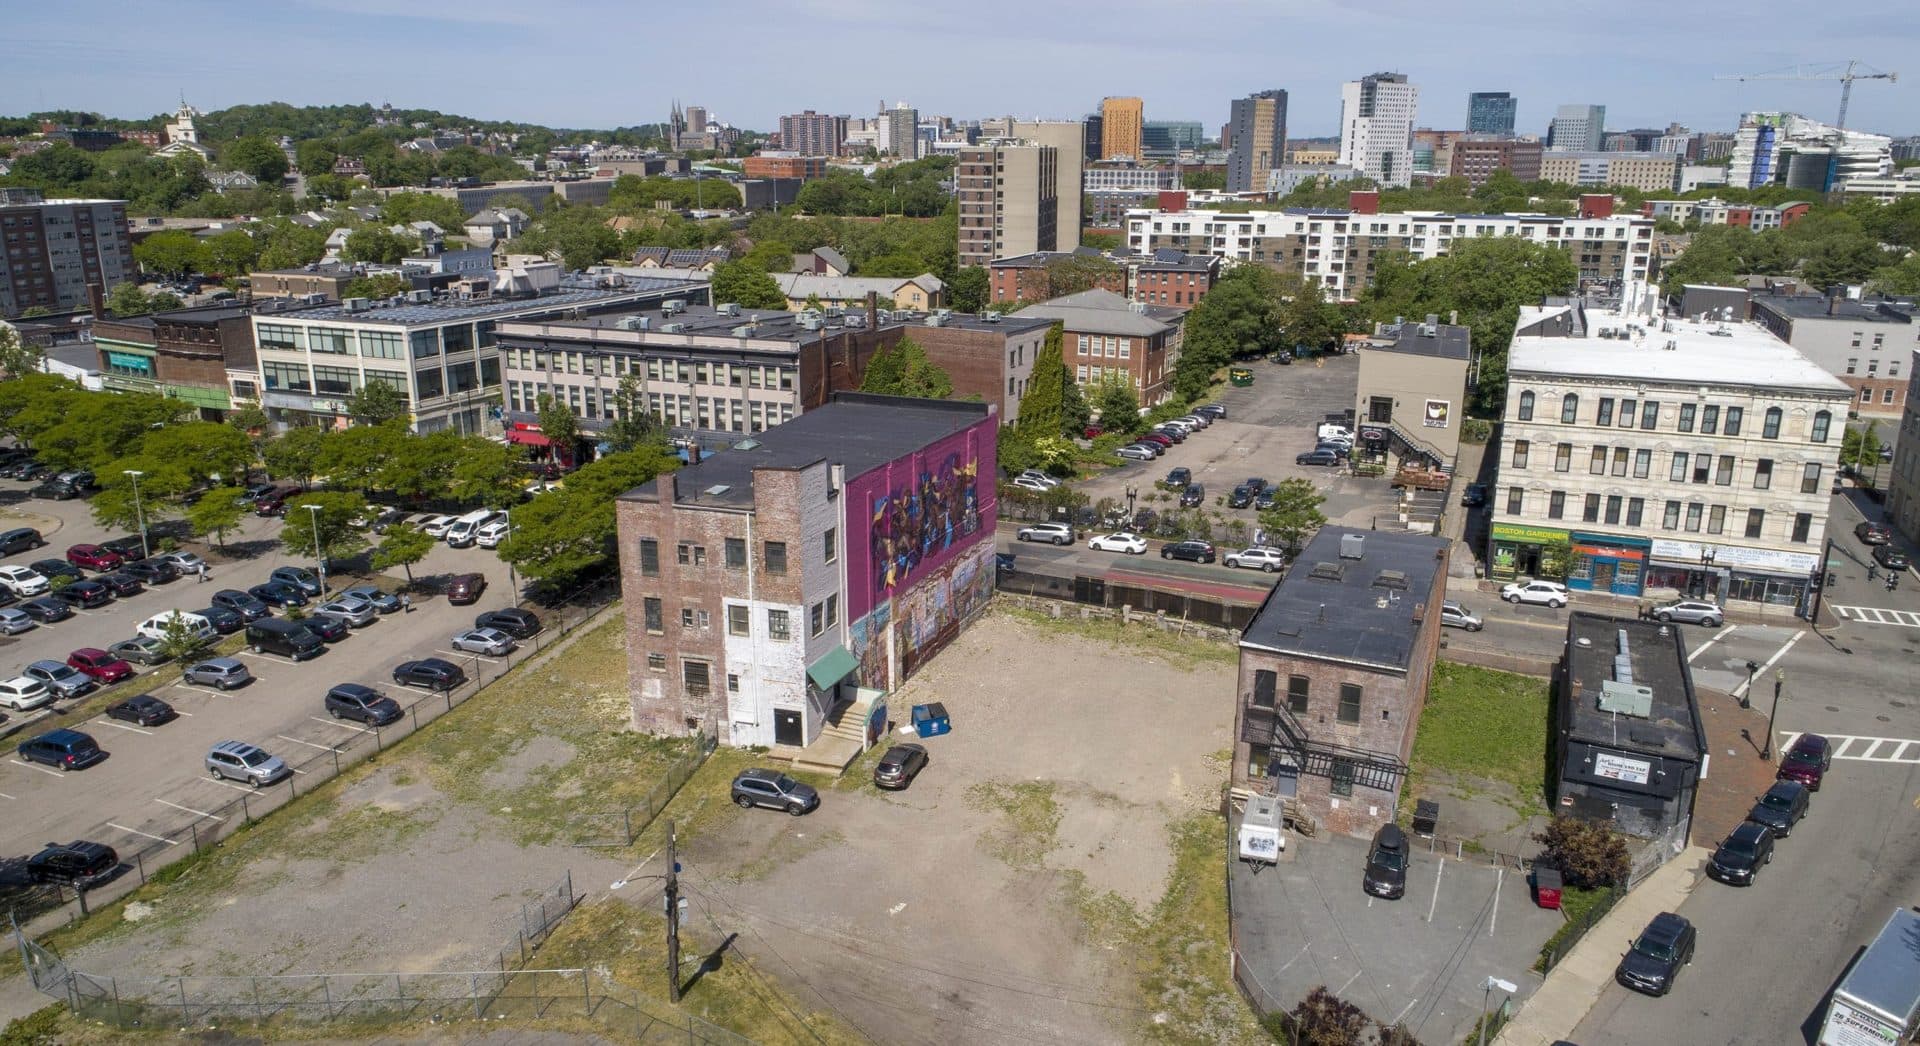 The planned Nubian Square Ascends and 2147 Washington Street developments will cover the Blair parking lot on the left, the open area in the center, and the car park on the far side of Washington Street. (Robin Lubbock/WBUR)